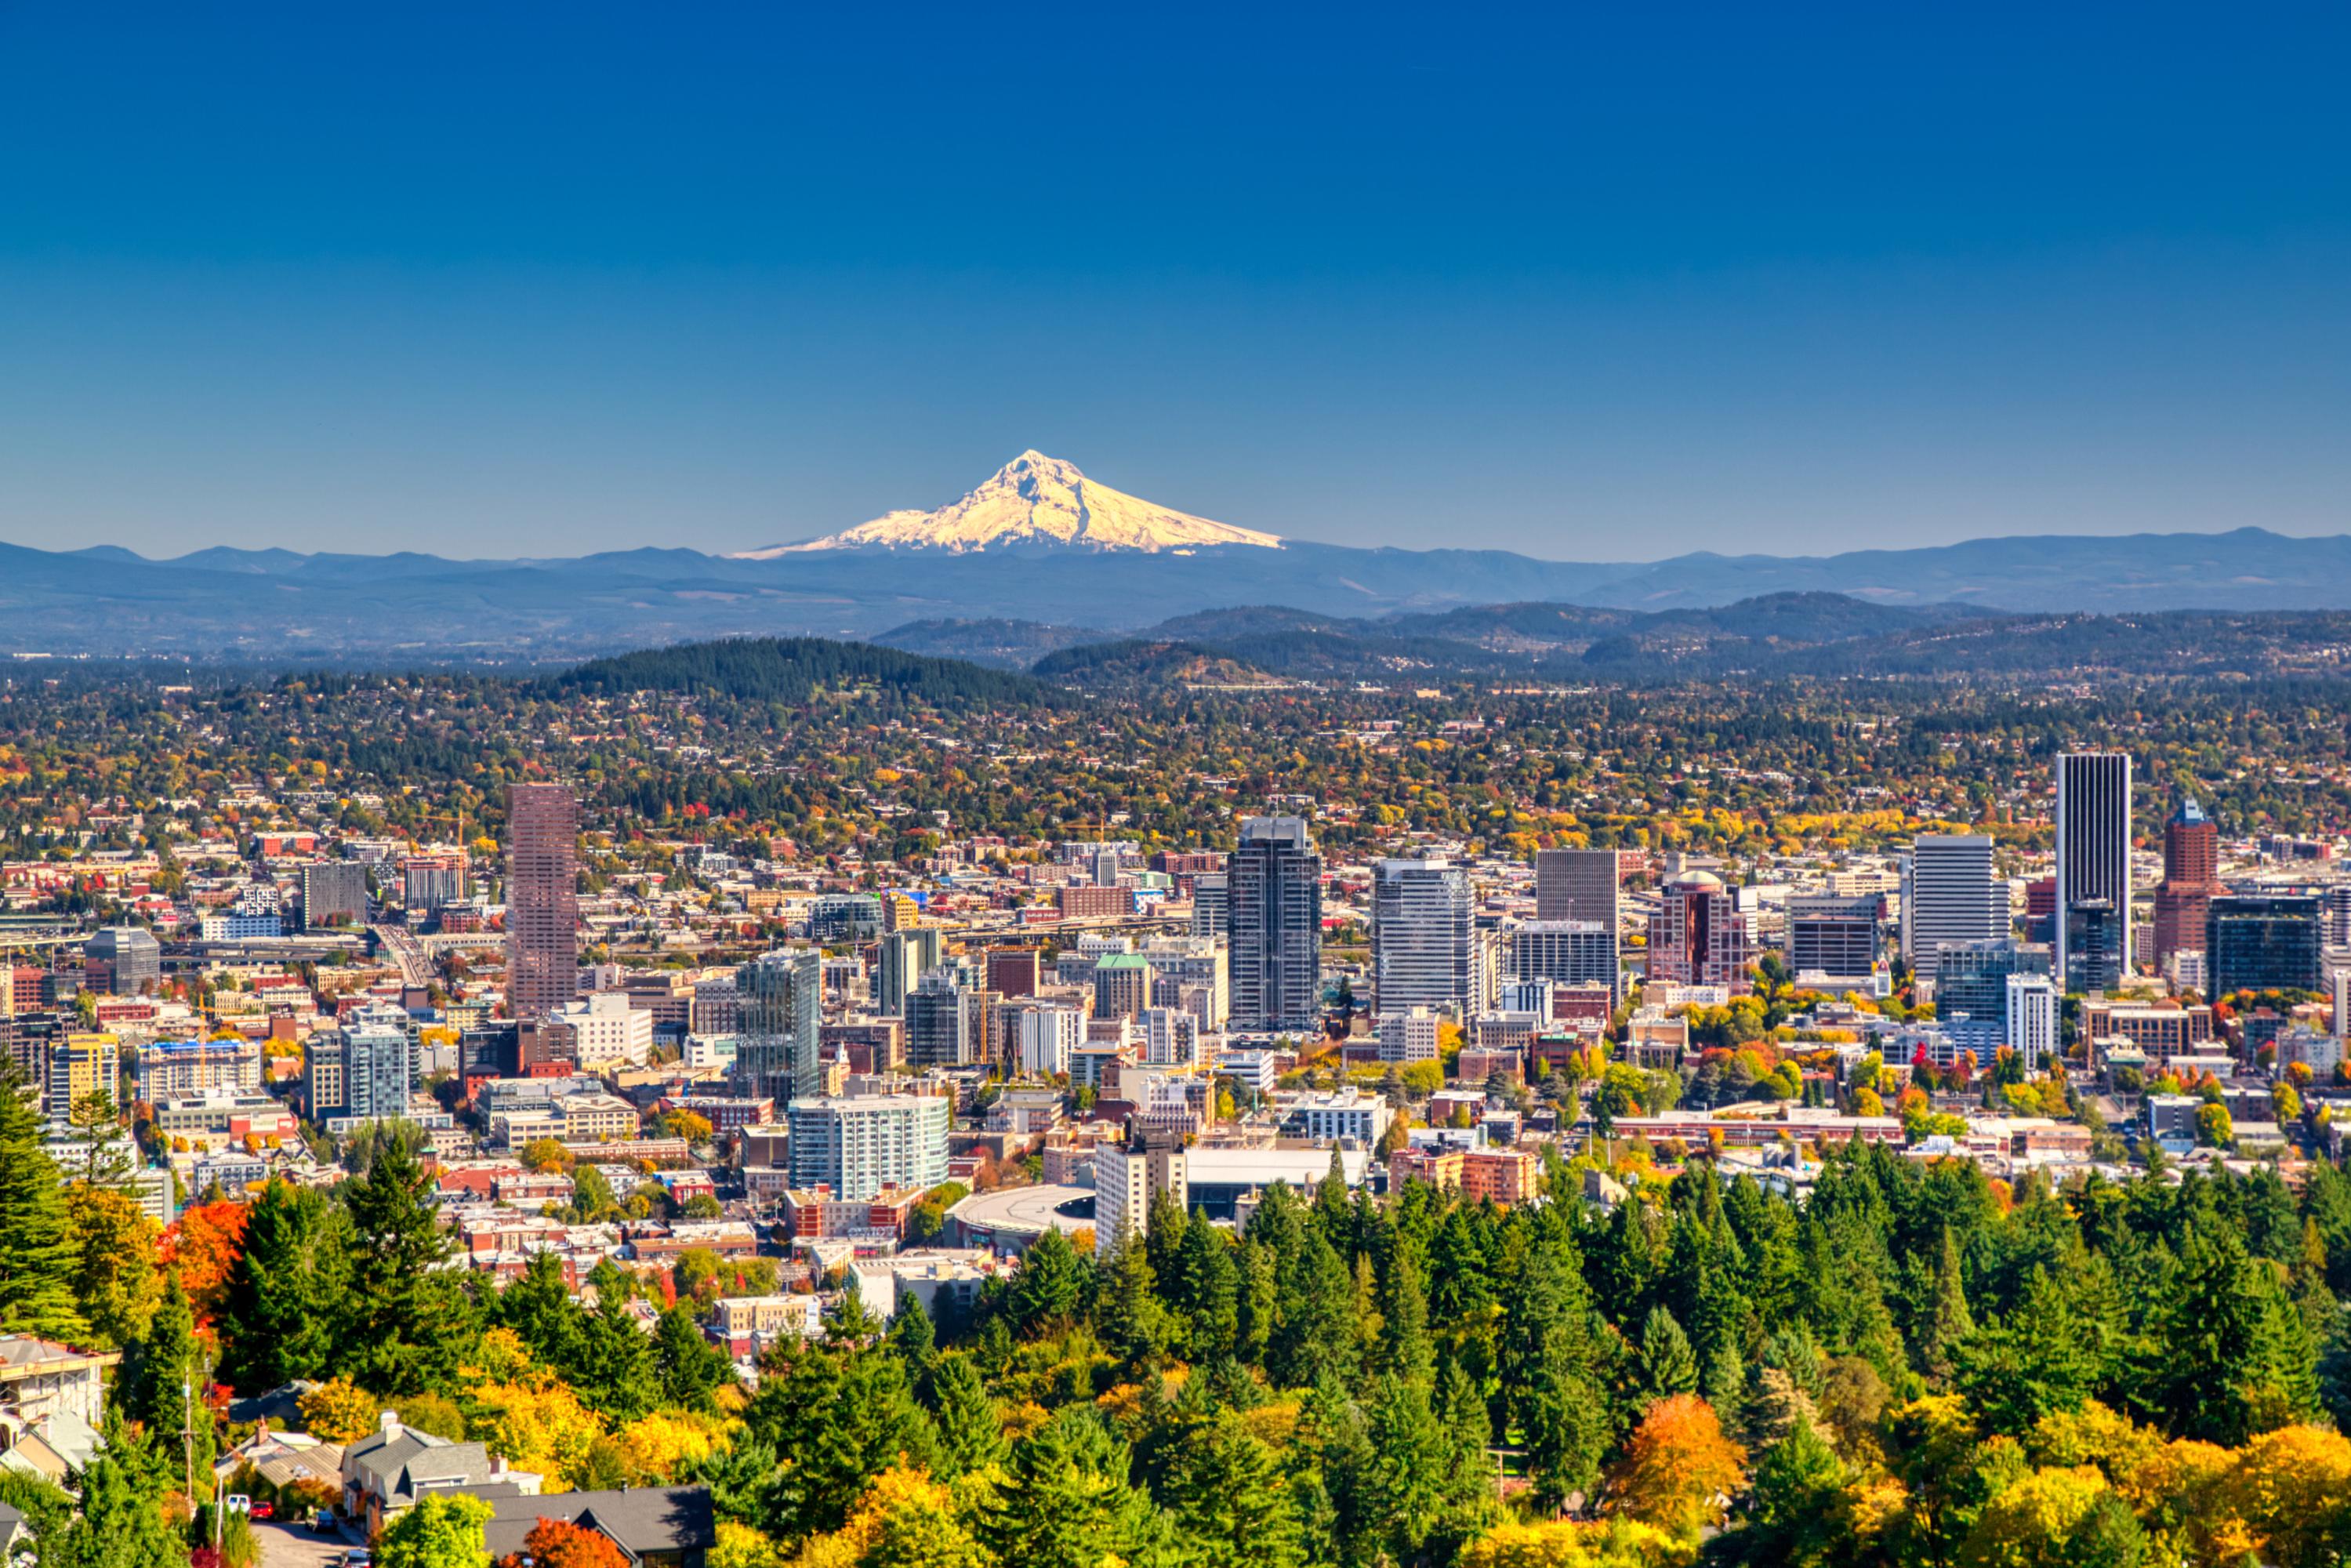 Low-angle aerial view of city of Portland with Mount Hood in the far background.